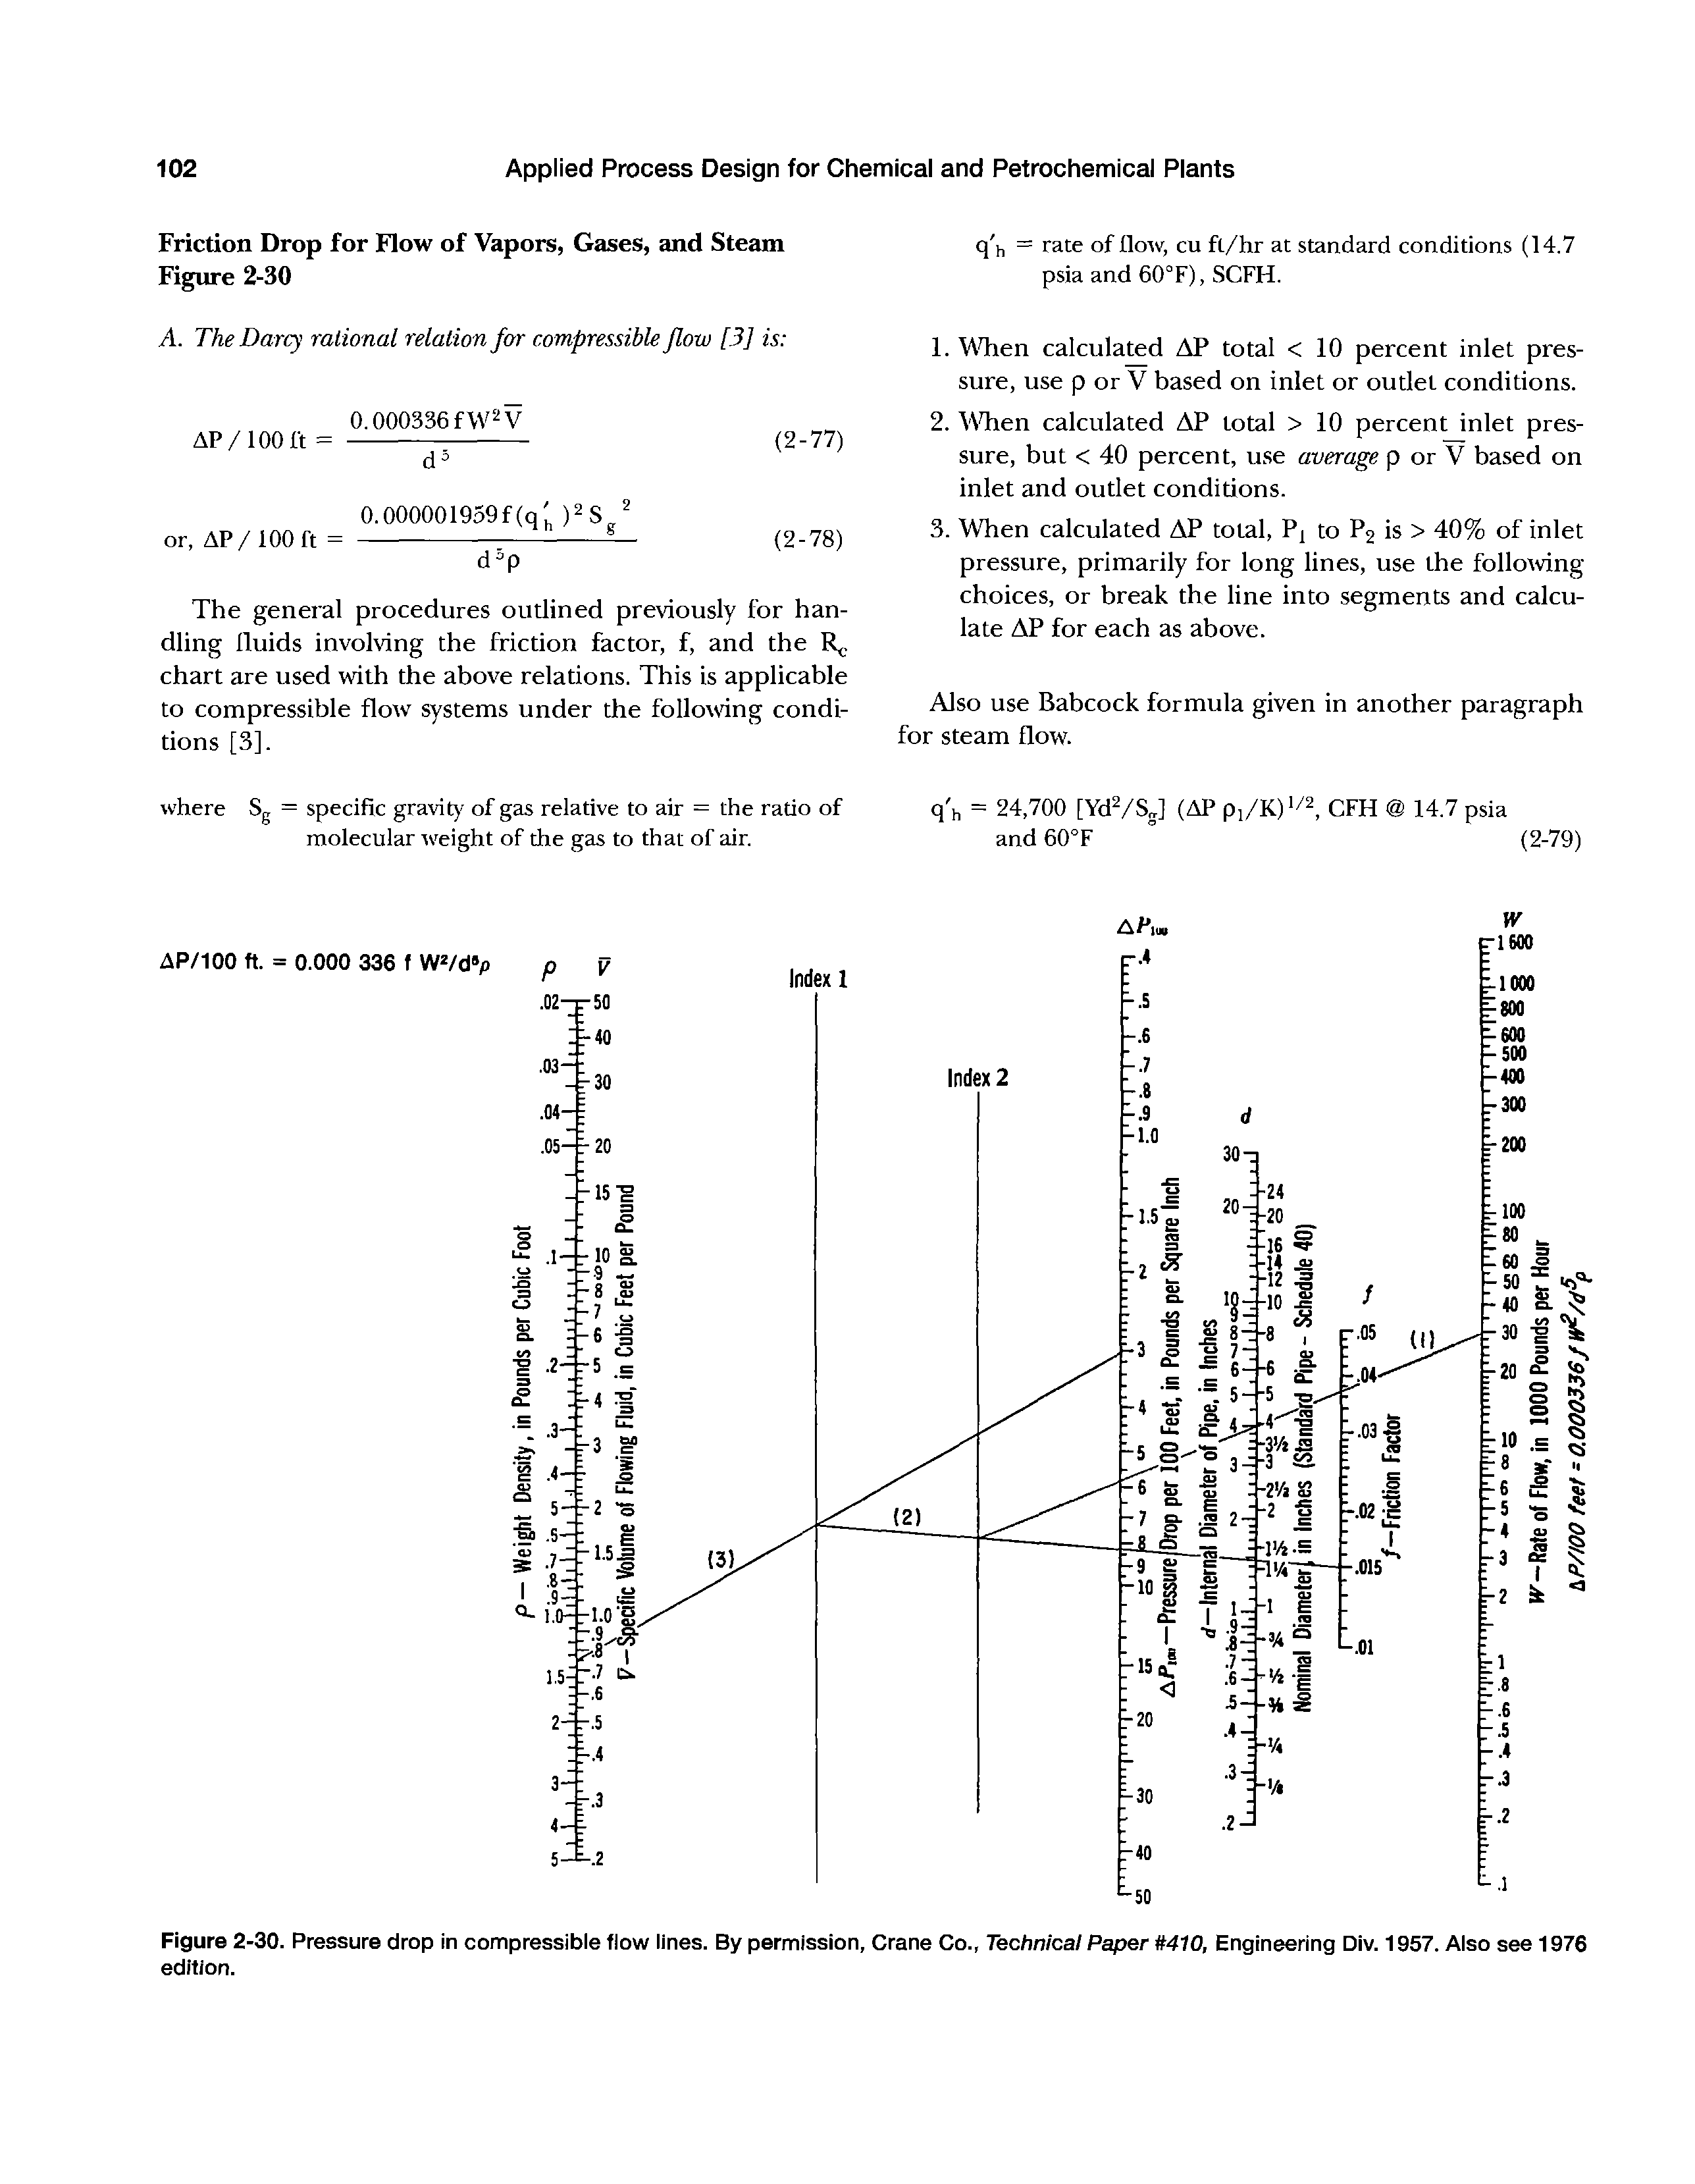 Figure 2-30. Pressure drop in compressible flow lines. By permission. Crane Co., Technical Paper 410, Engineering Div. 1957. Also see 1976 edition.